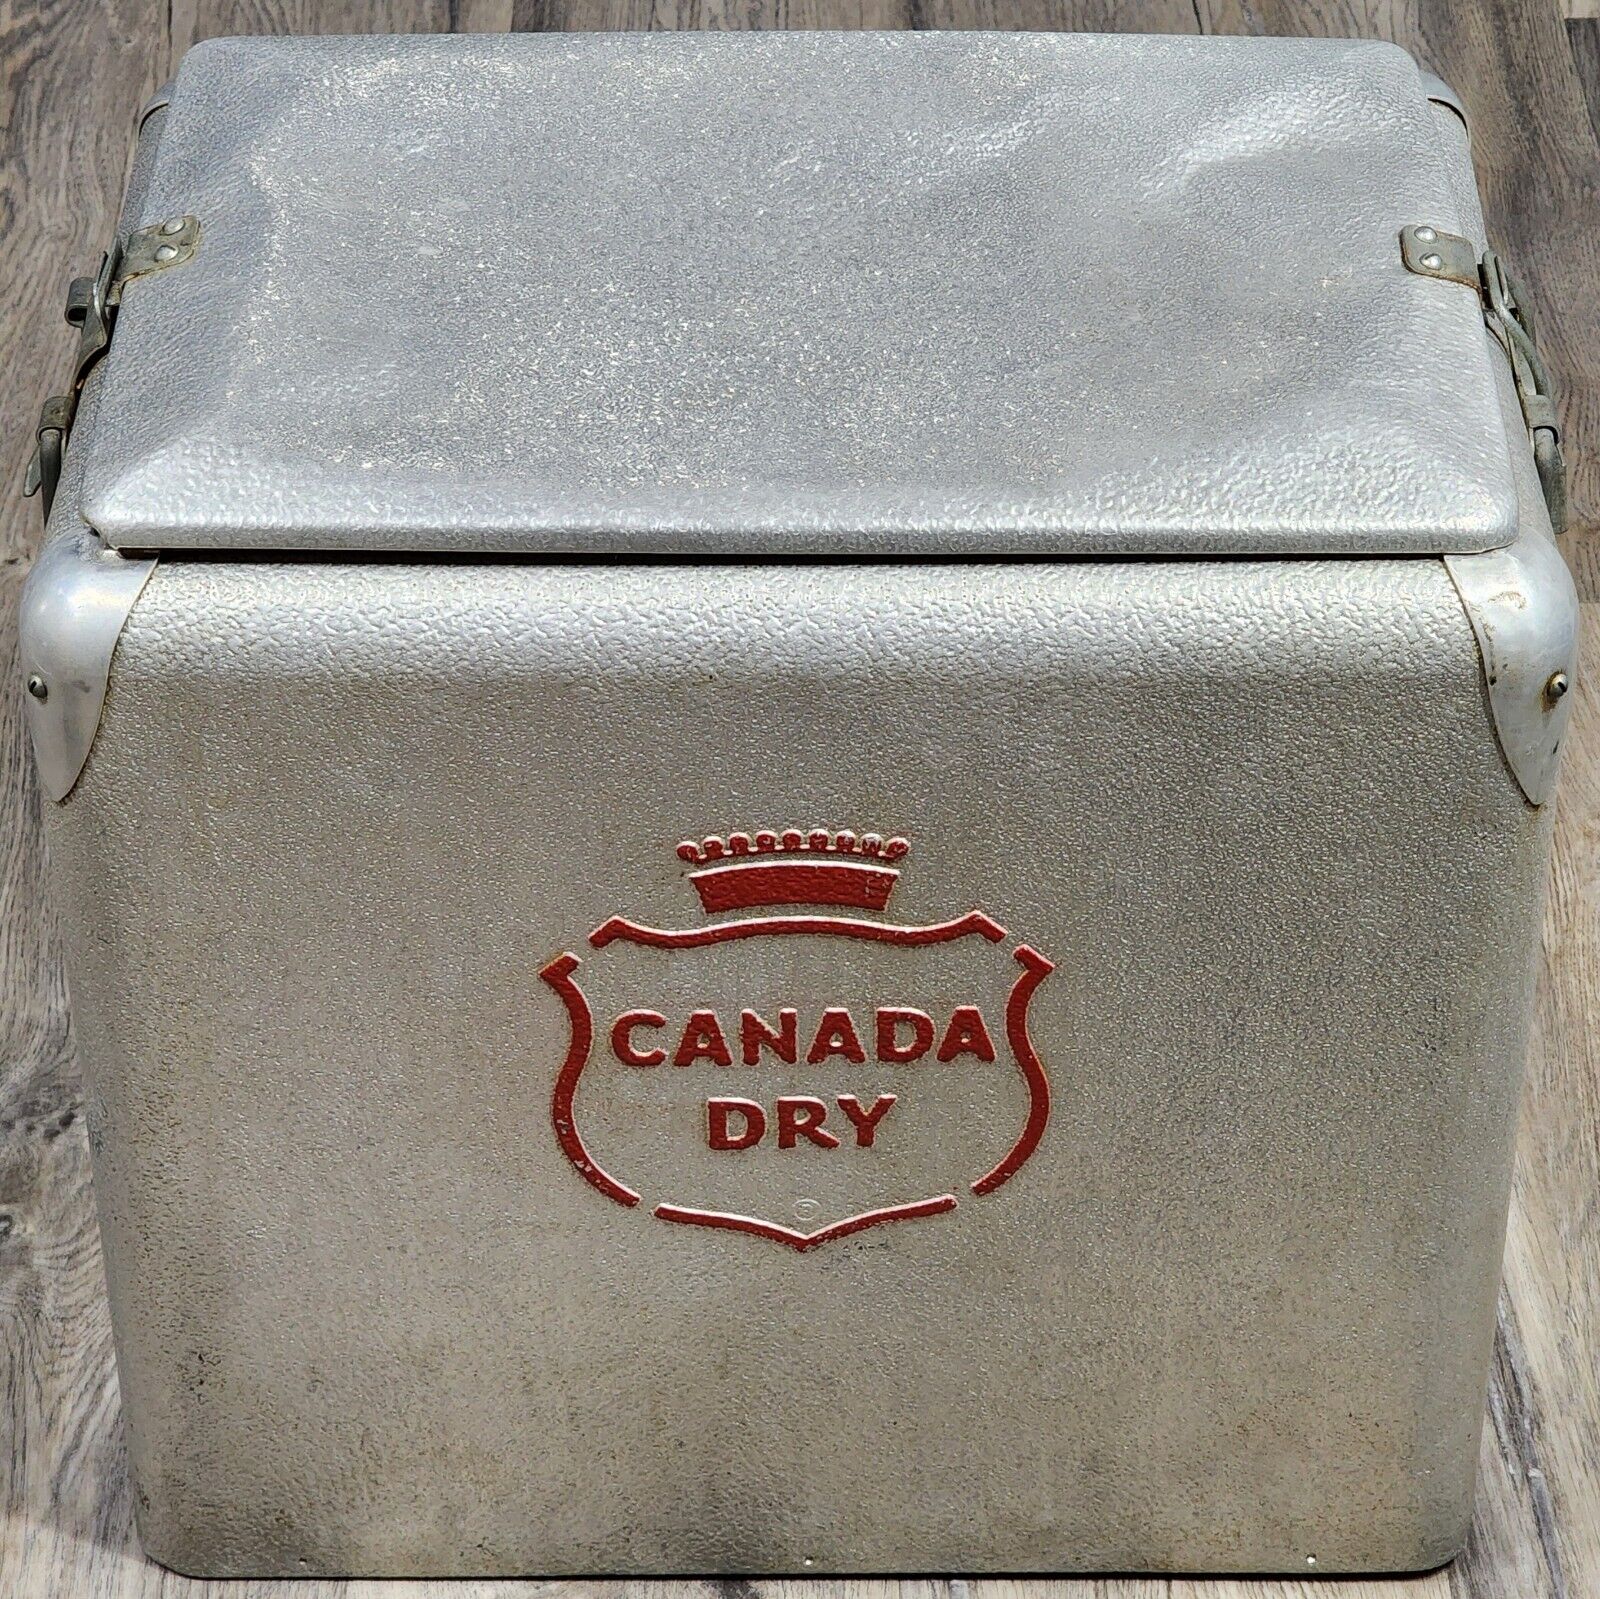 Vintage Canada Dry Metal Aluminum Cooler Ice Chest Can Opener With Insert Tray